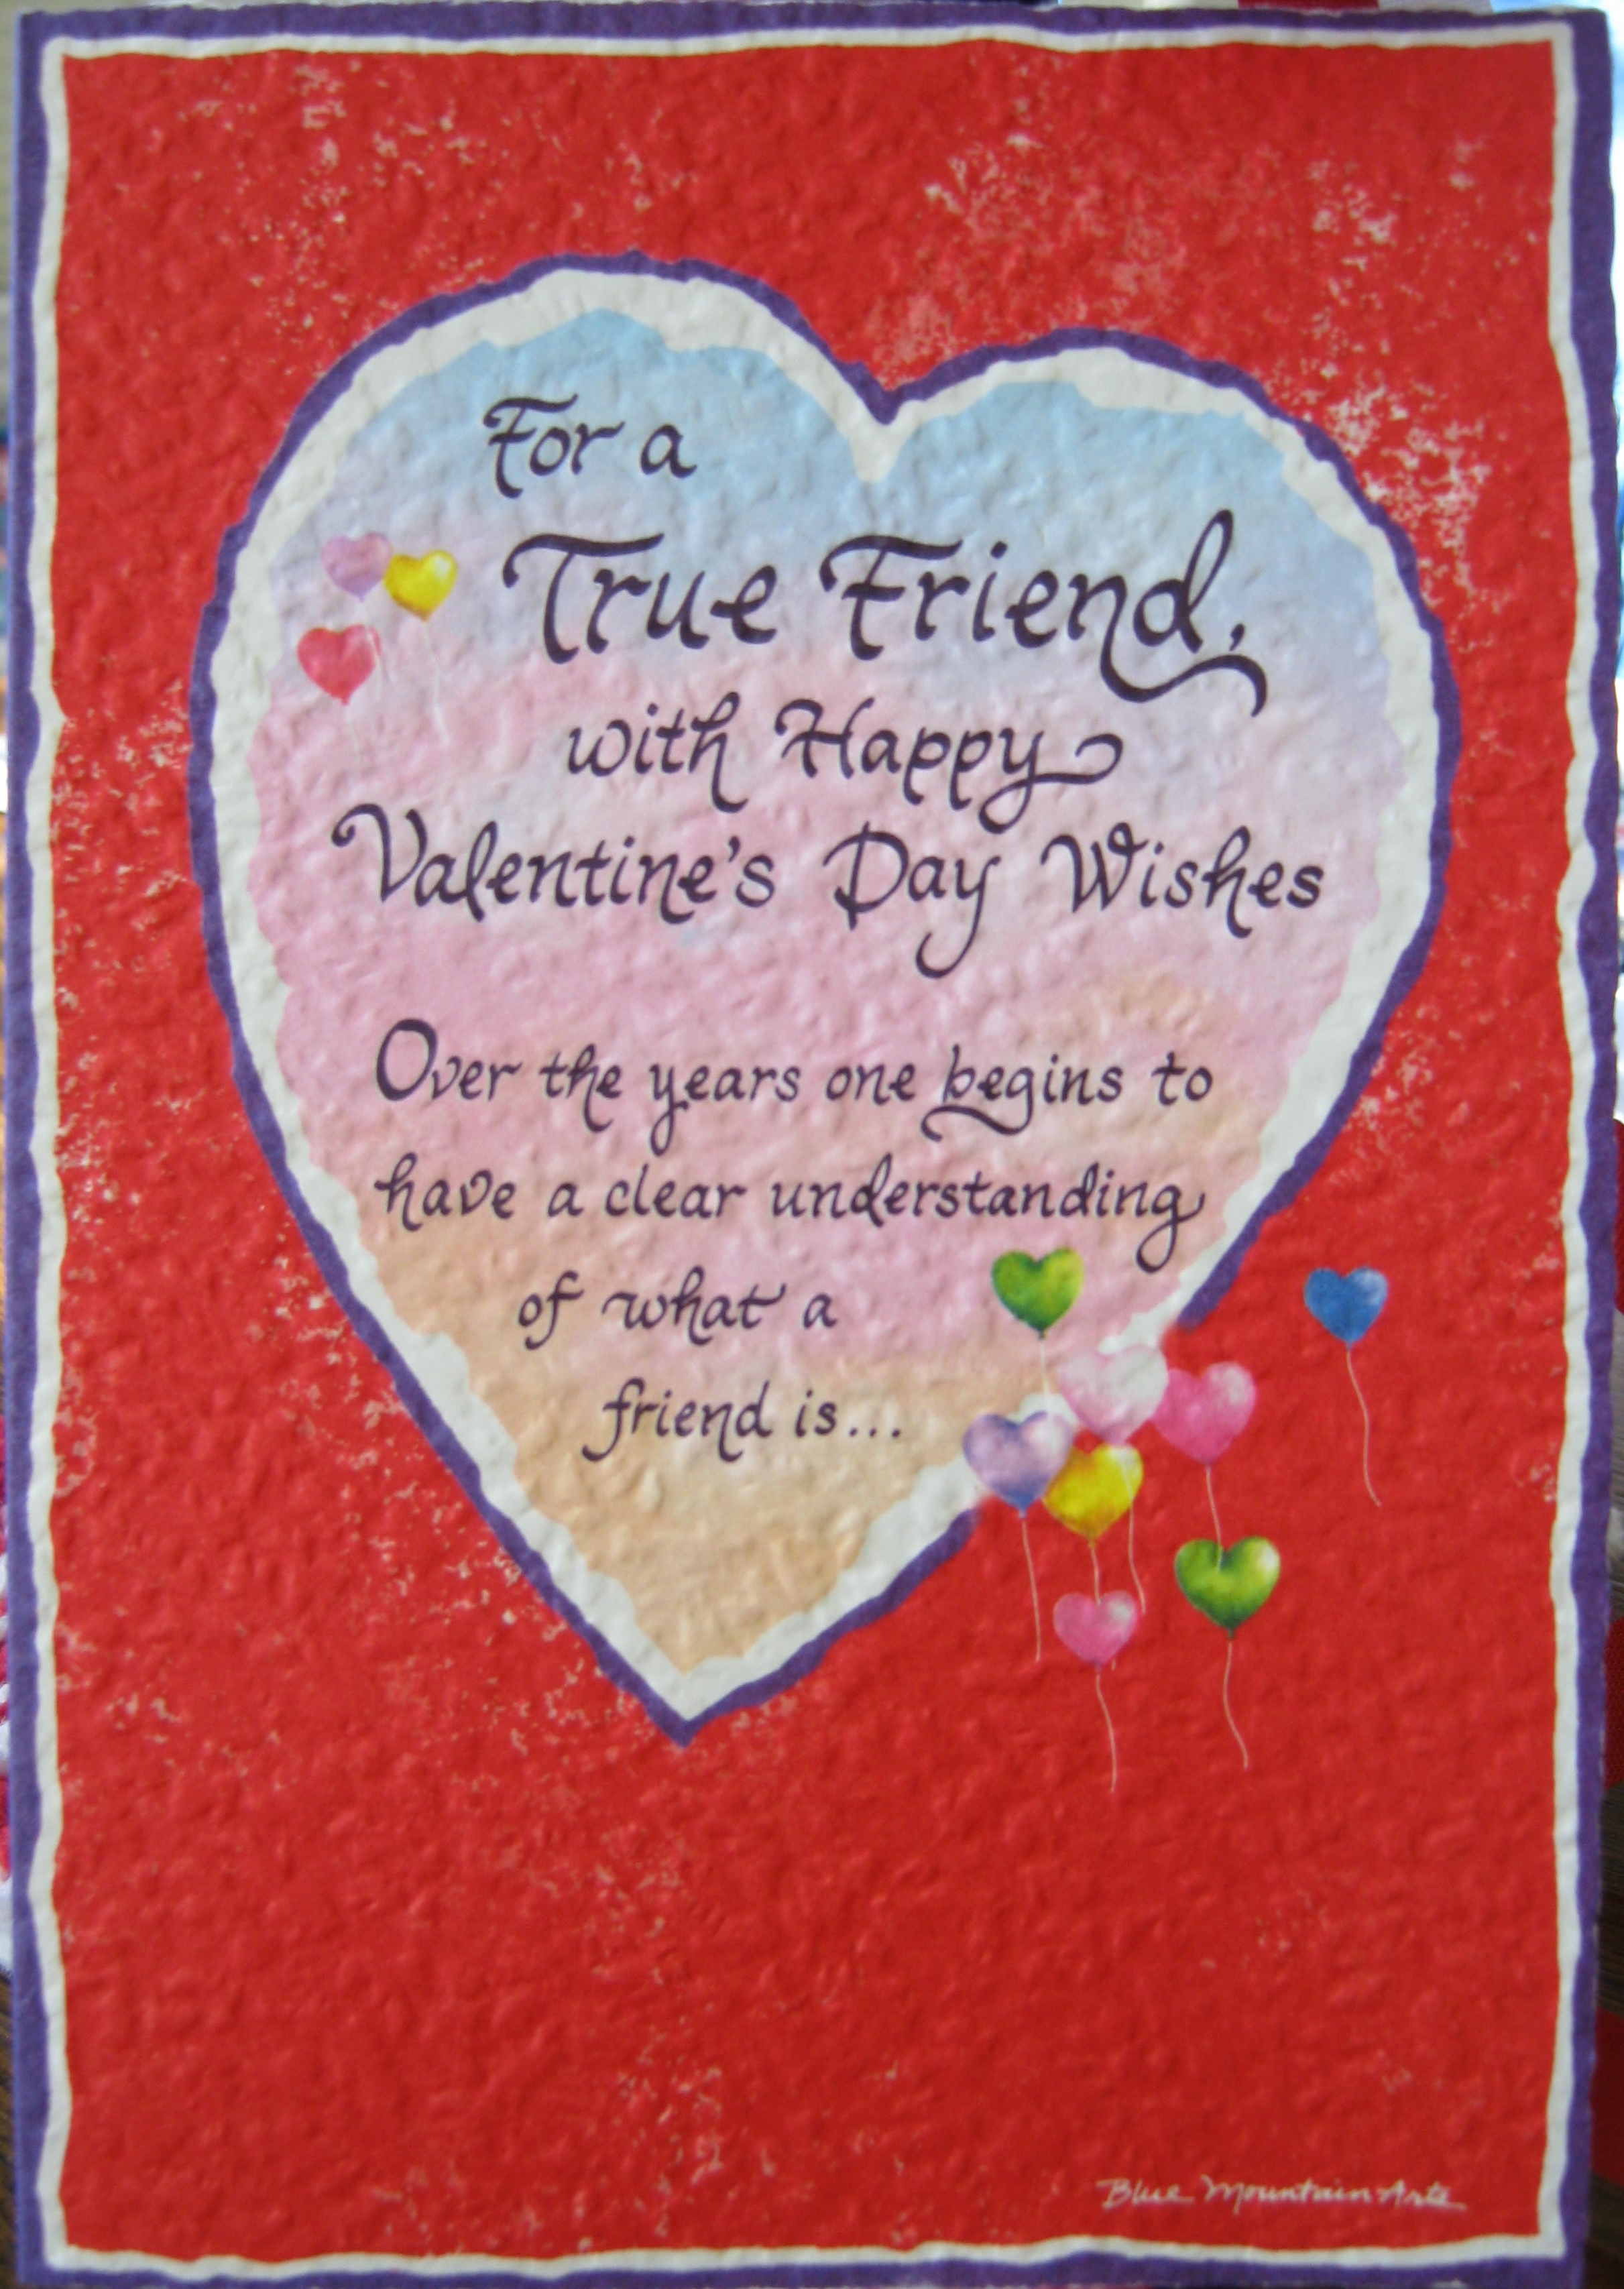 Valentines Day Quotes About Friendship. QuotesGram2422 x 3414